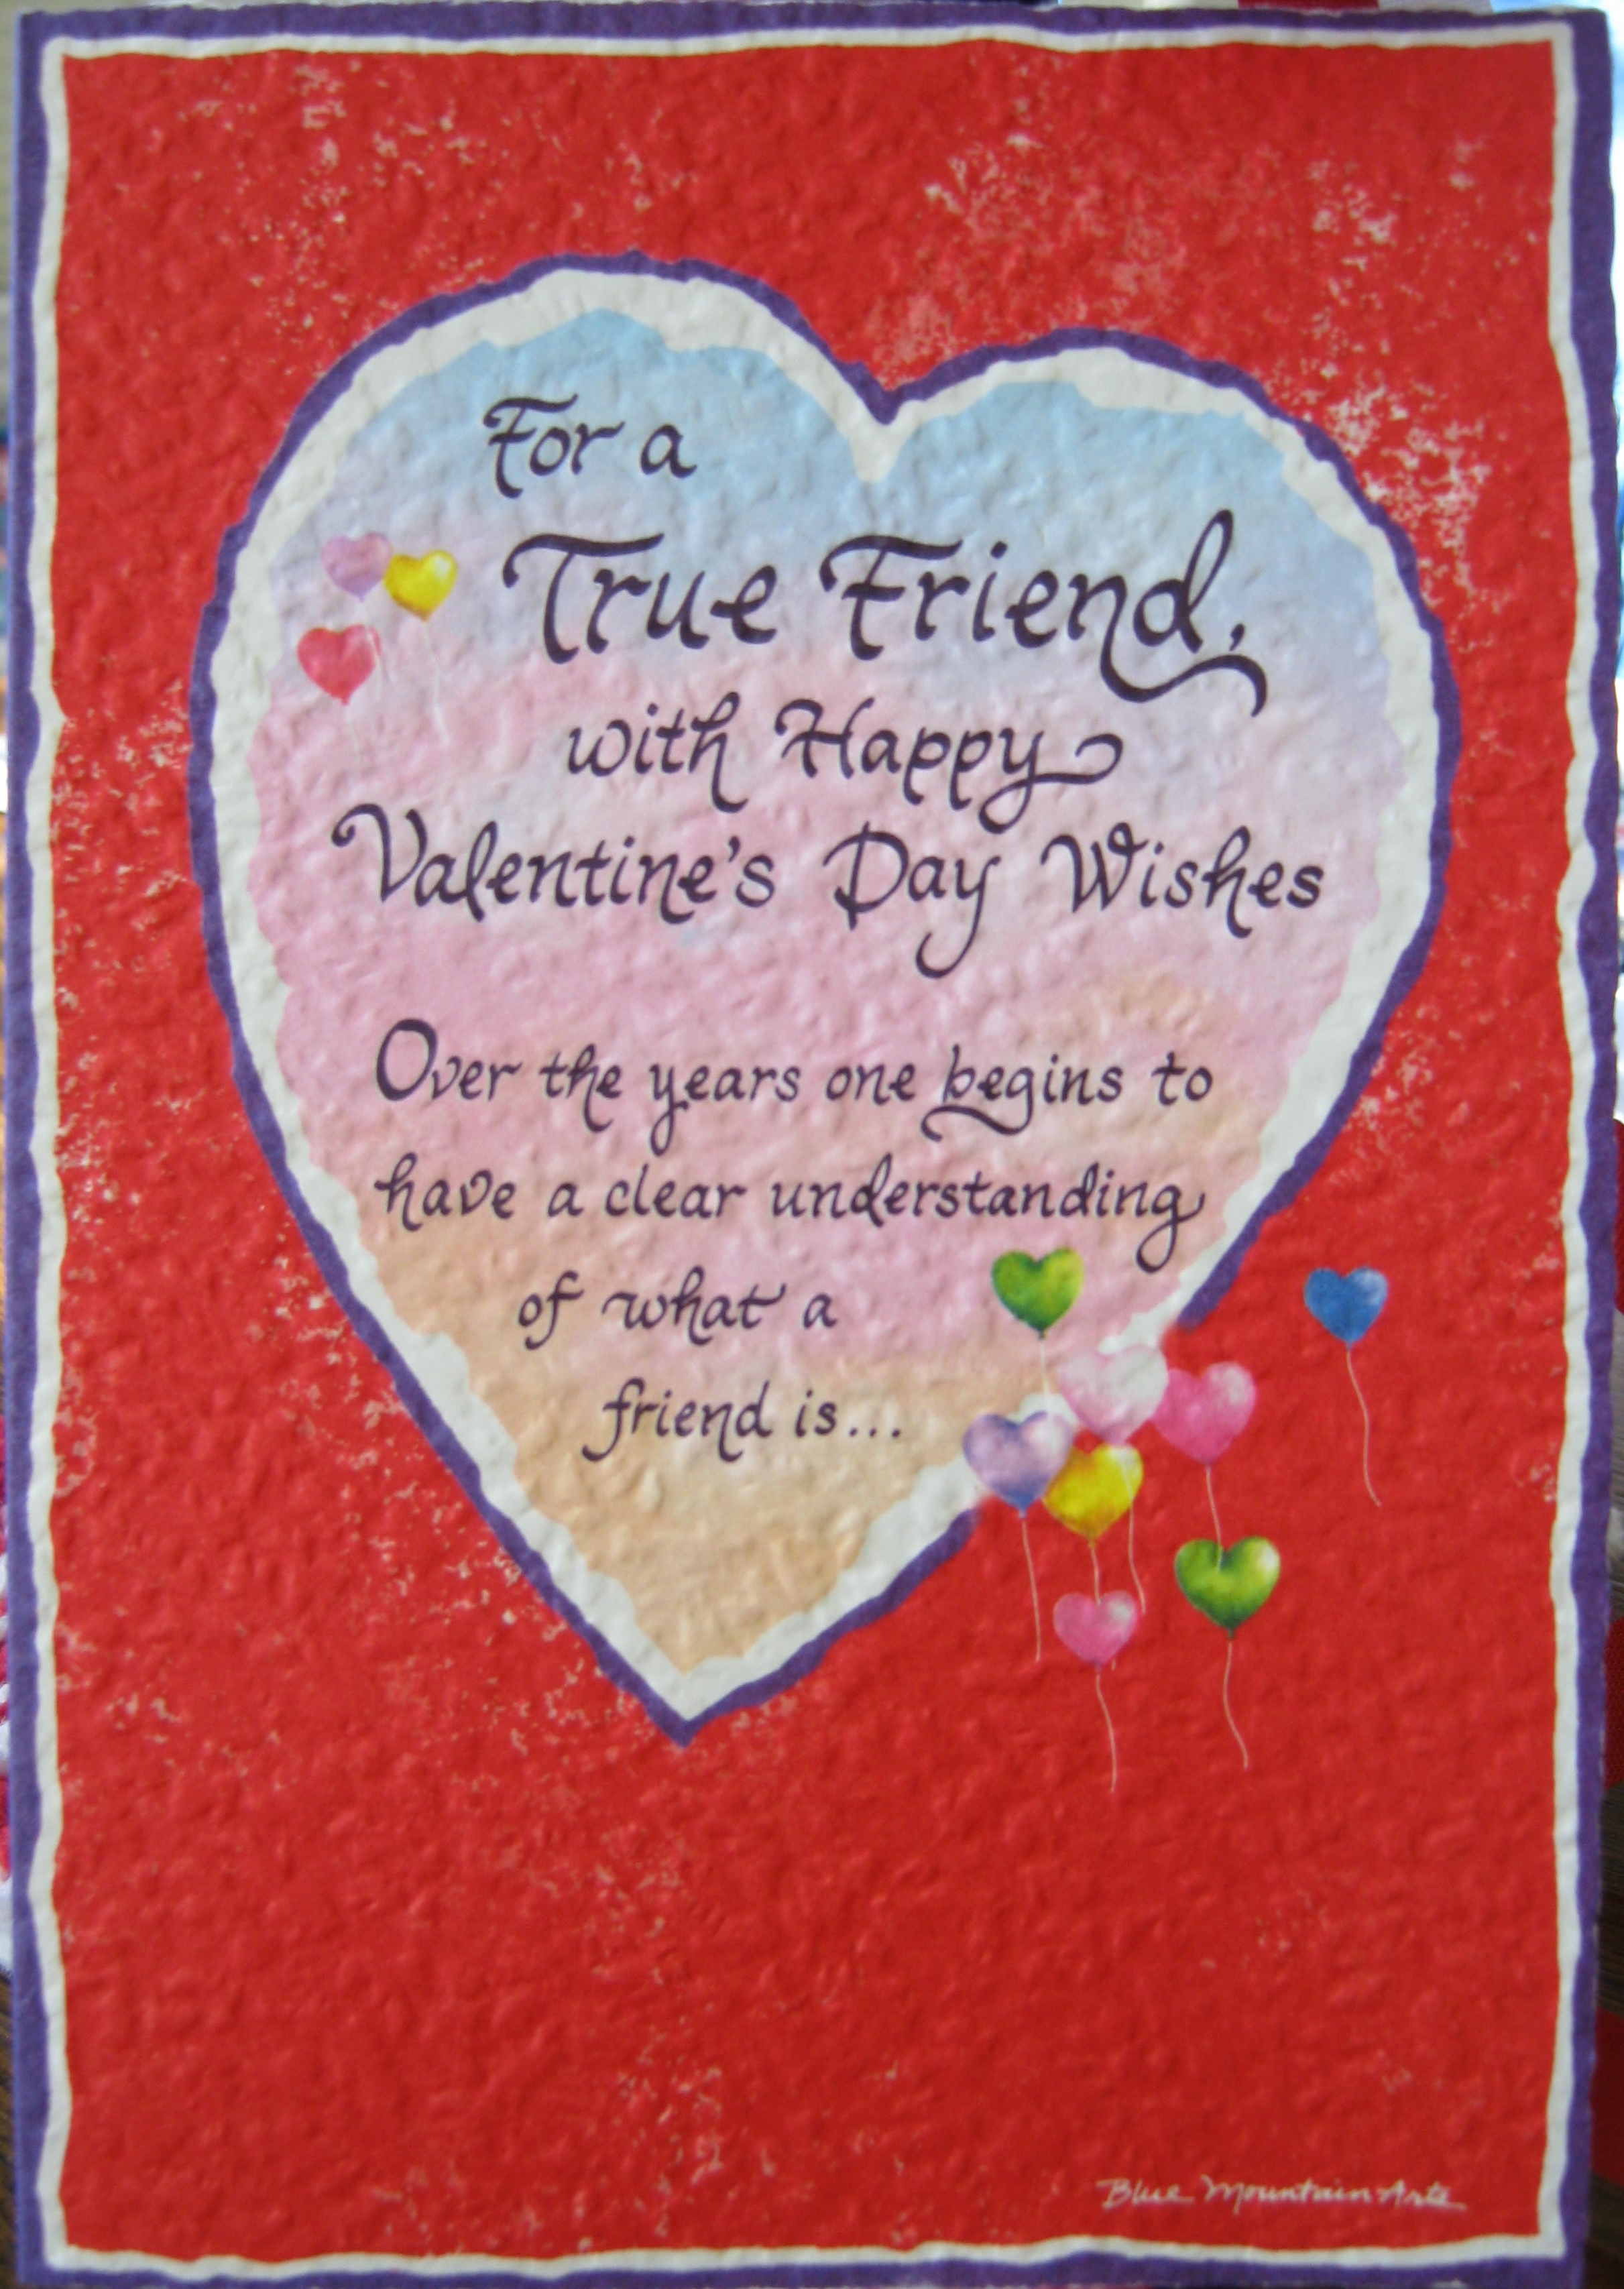 Valentines Day Quotes About Friendship. QuotesGram2422 x 3414